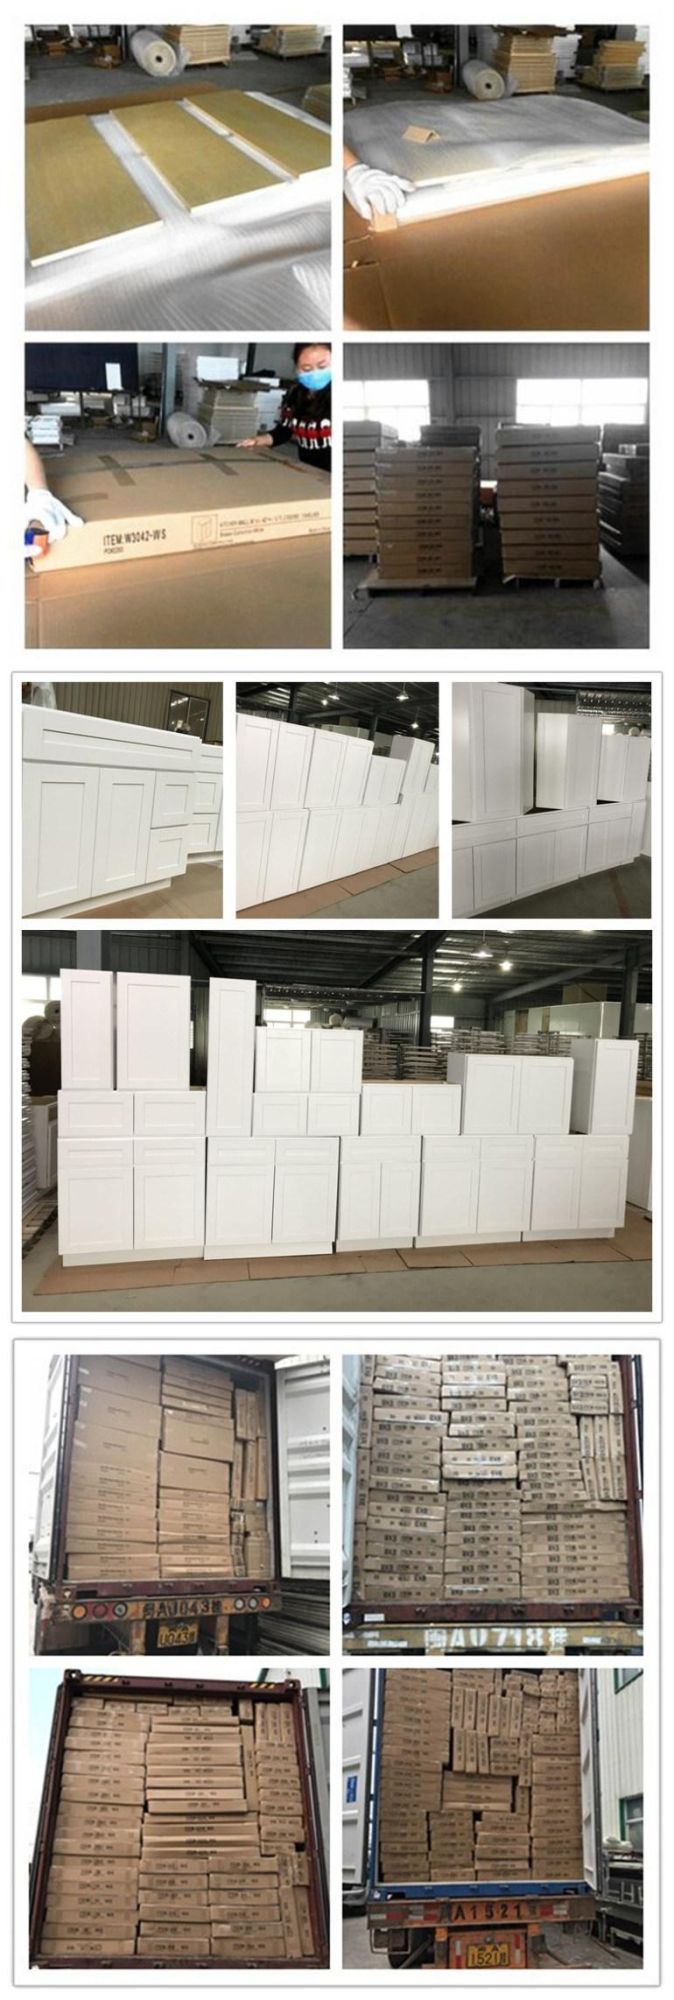 Manufacture Framed Plywood Solid Birch Kitchen Cabinets 36 42 High